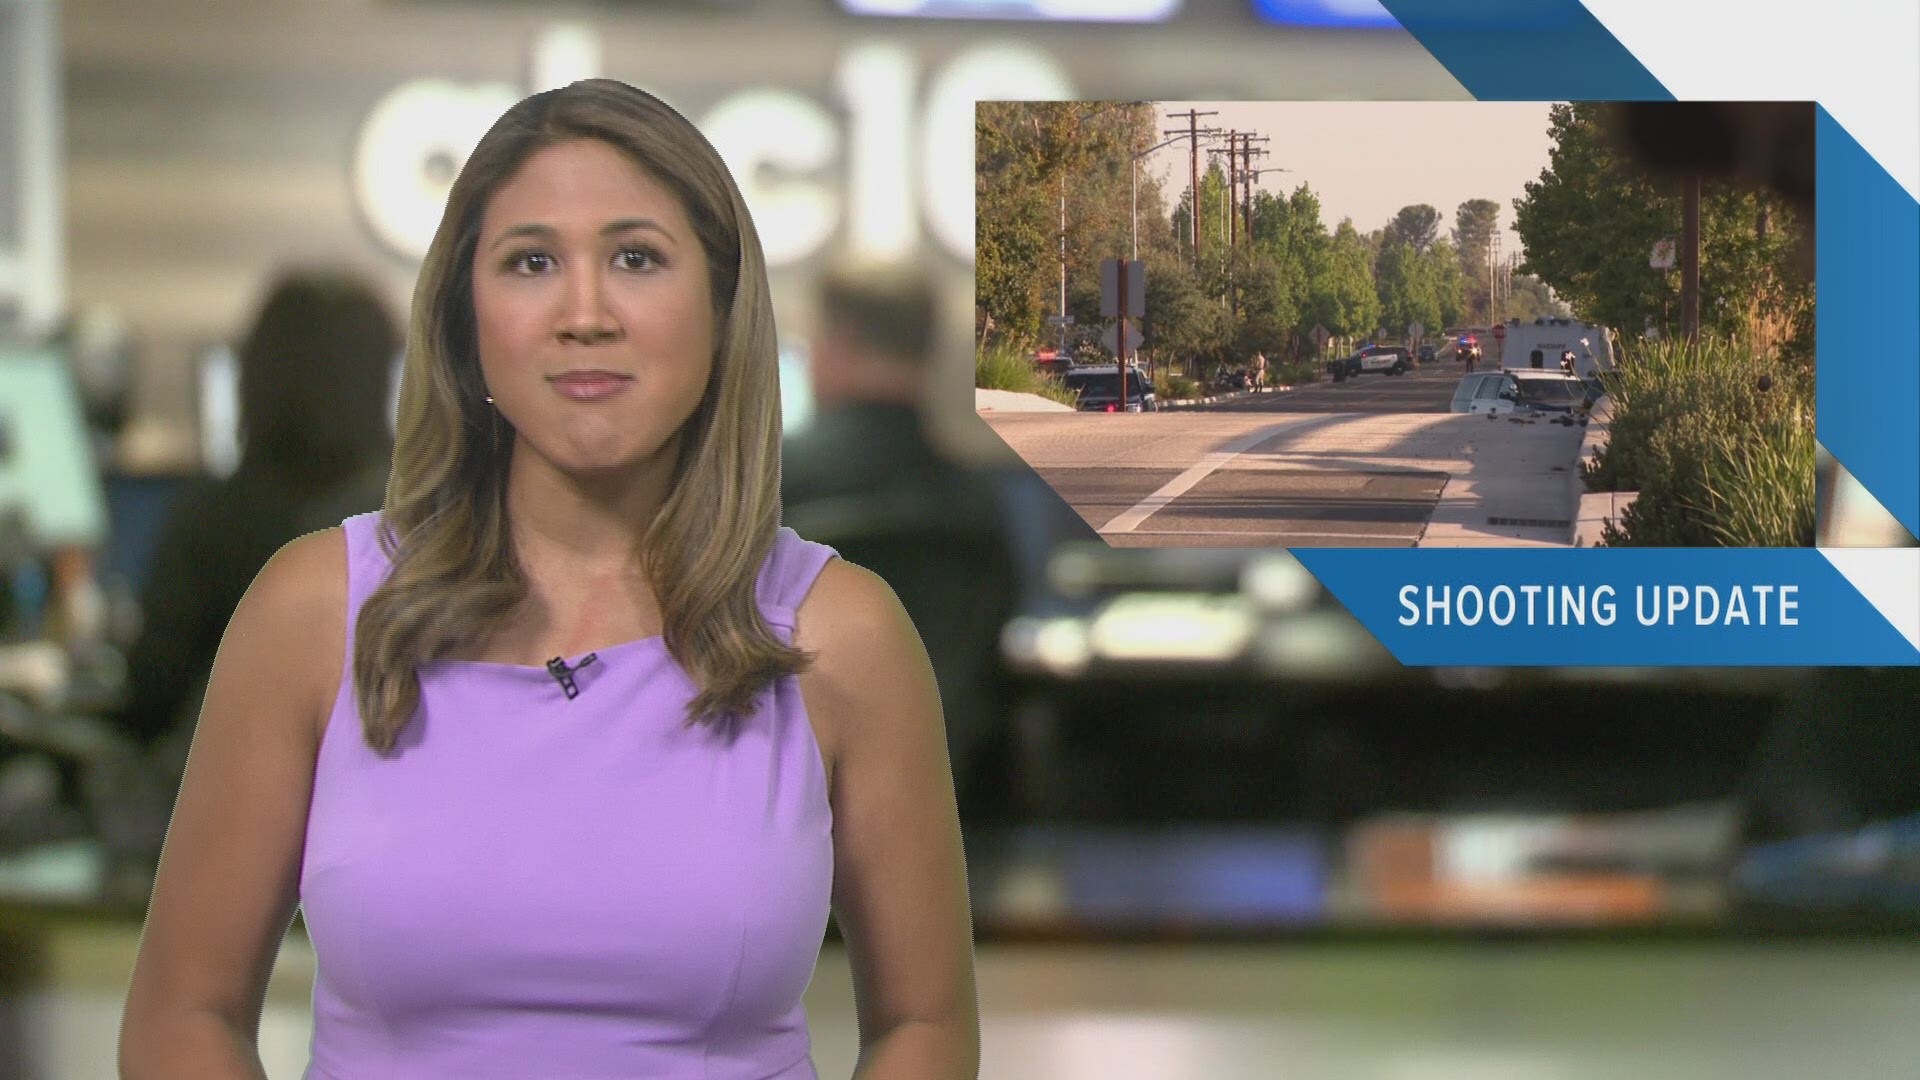 Evening Headlines: August 30, 2019 | Catch in-depth reporting on #LateNewsTonight at 11 p.m. | The latest Sacramento news is always at www.abc10.com